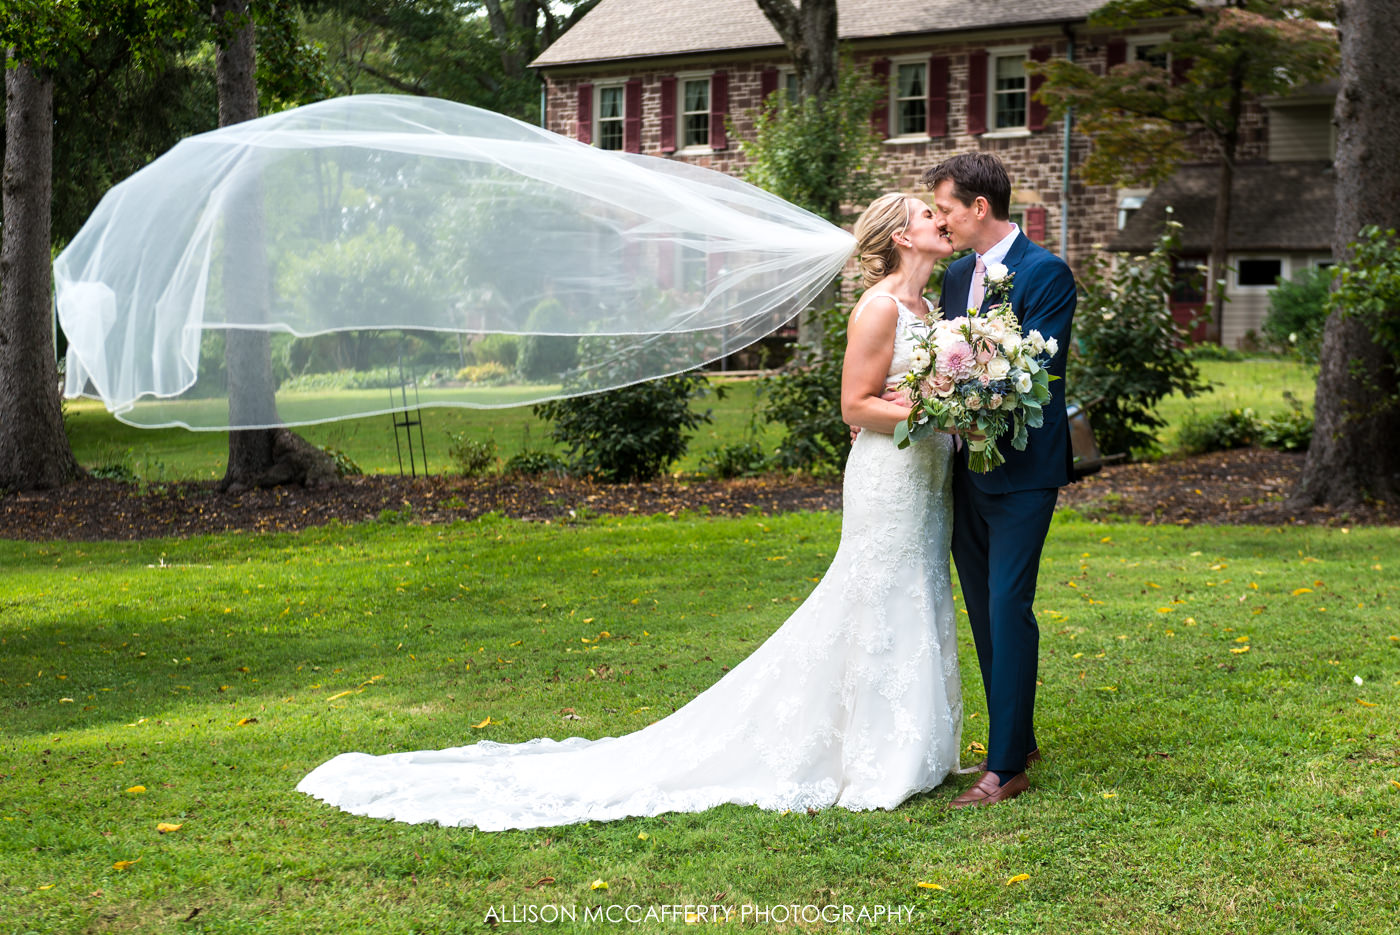 Wedding photo of bride with long veil floating in air